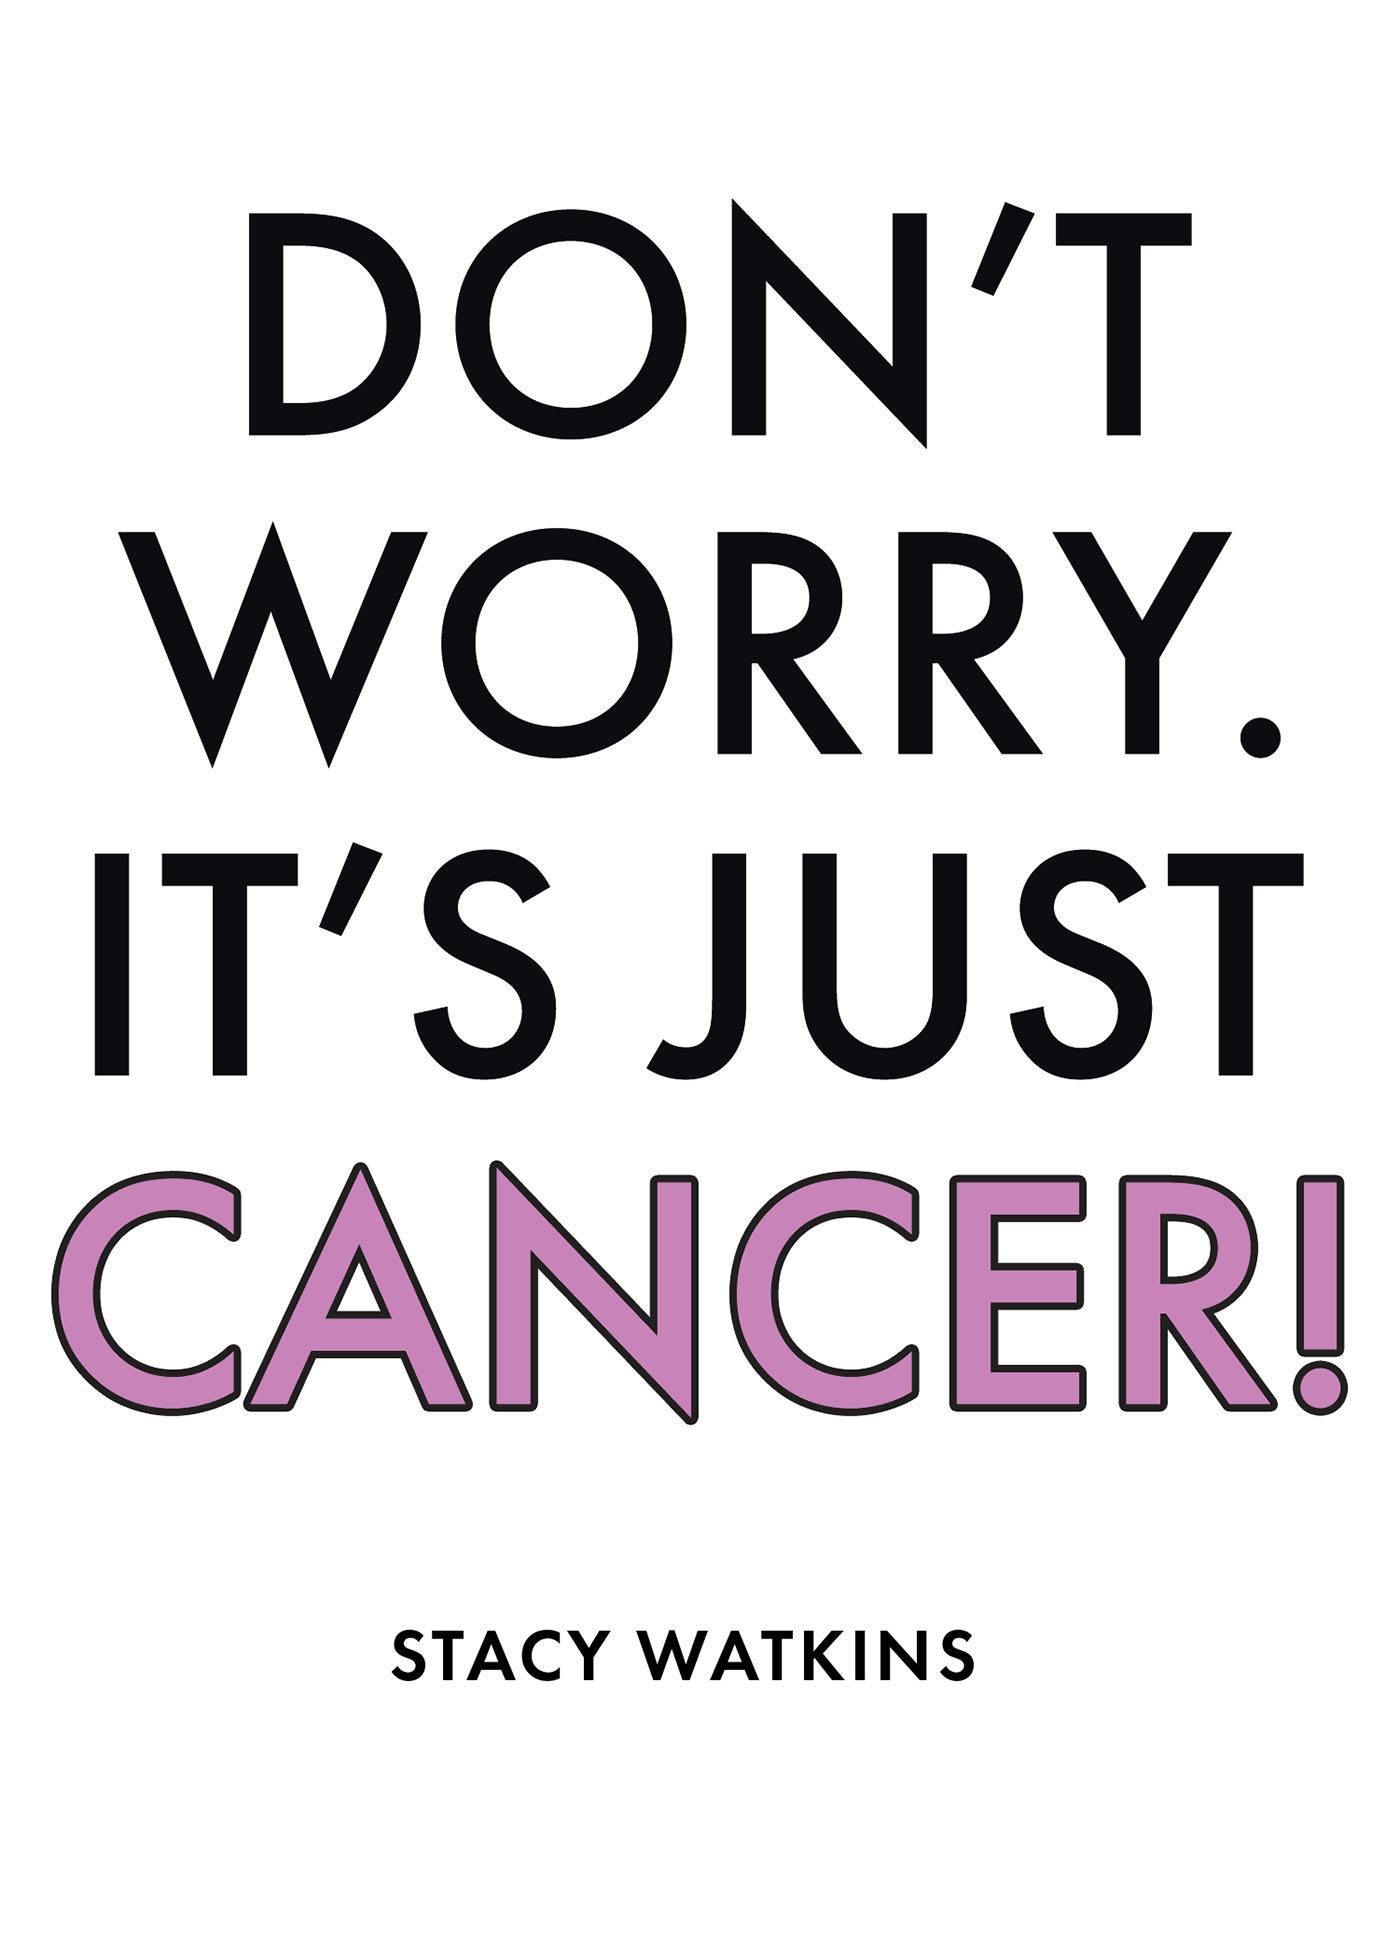 Stacy Watkins’s Newly Released “Don’t Worry. It’s Just Cancer!” is an Encouraging Message of Hope for Others Facing a Surprising Diagnosis